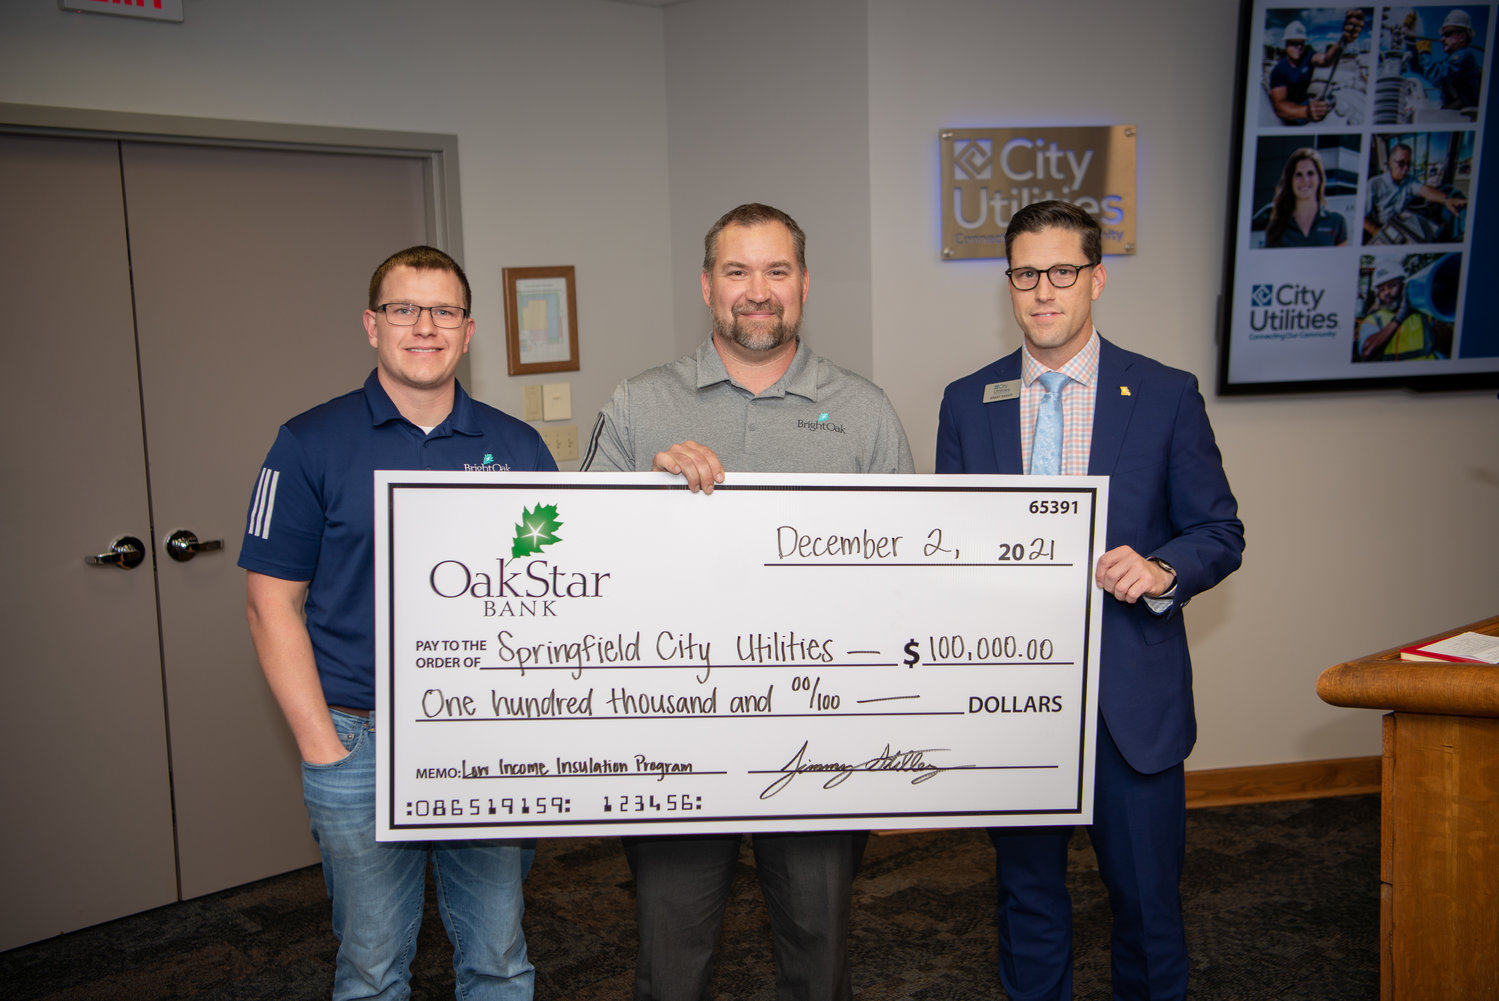 Adam Stipanovich and Jimmy Stilley of OakStar Bank’s BrightOak division deliver a $100,000 check to CU Chief Customer Officer Brent Baker.